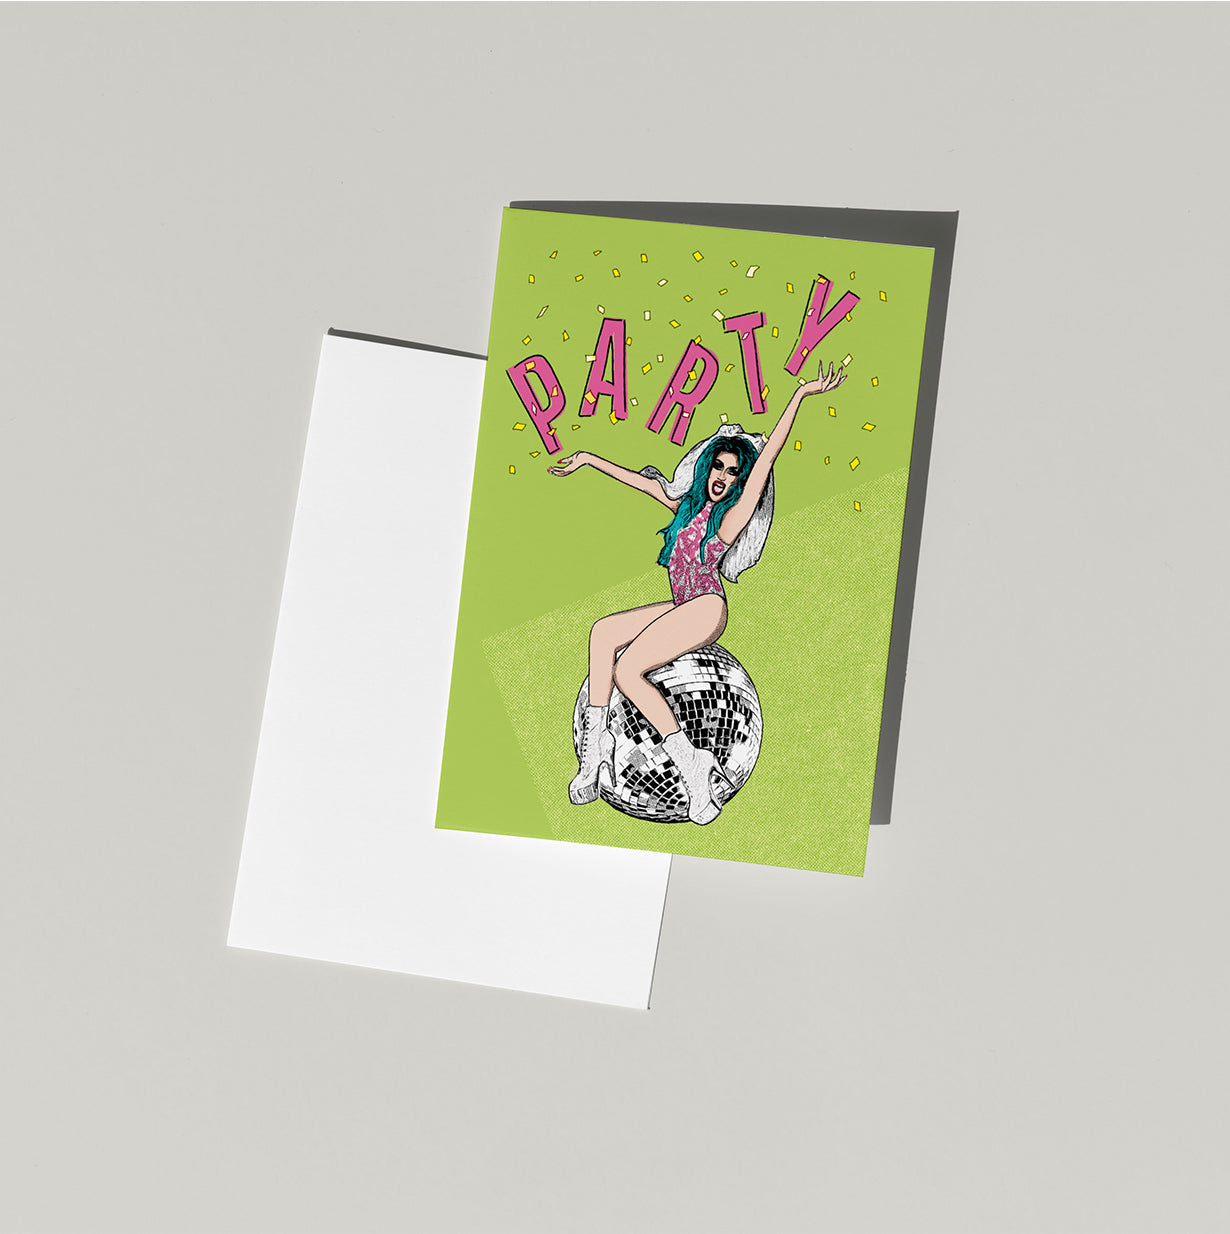 Adore Delano Party Card | Drag Queen Type | Illustration Card | RuPaul's Drag Race